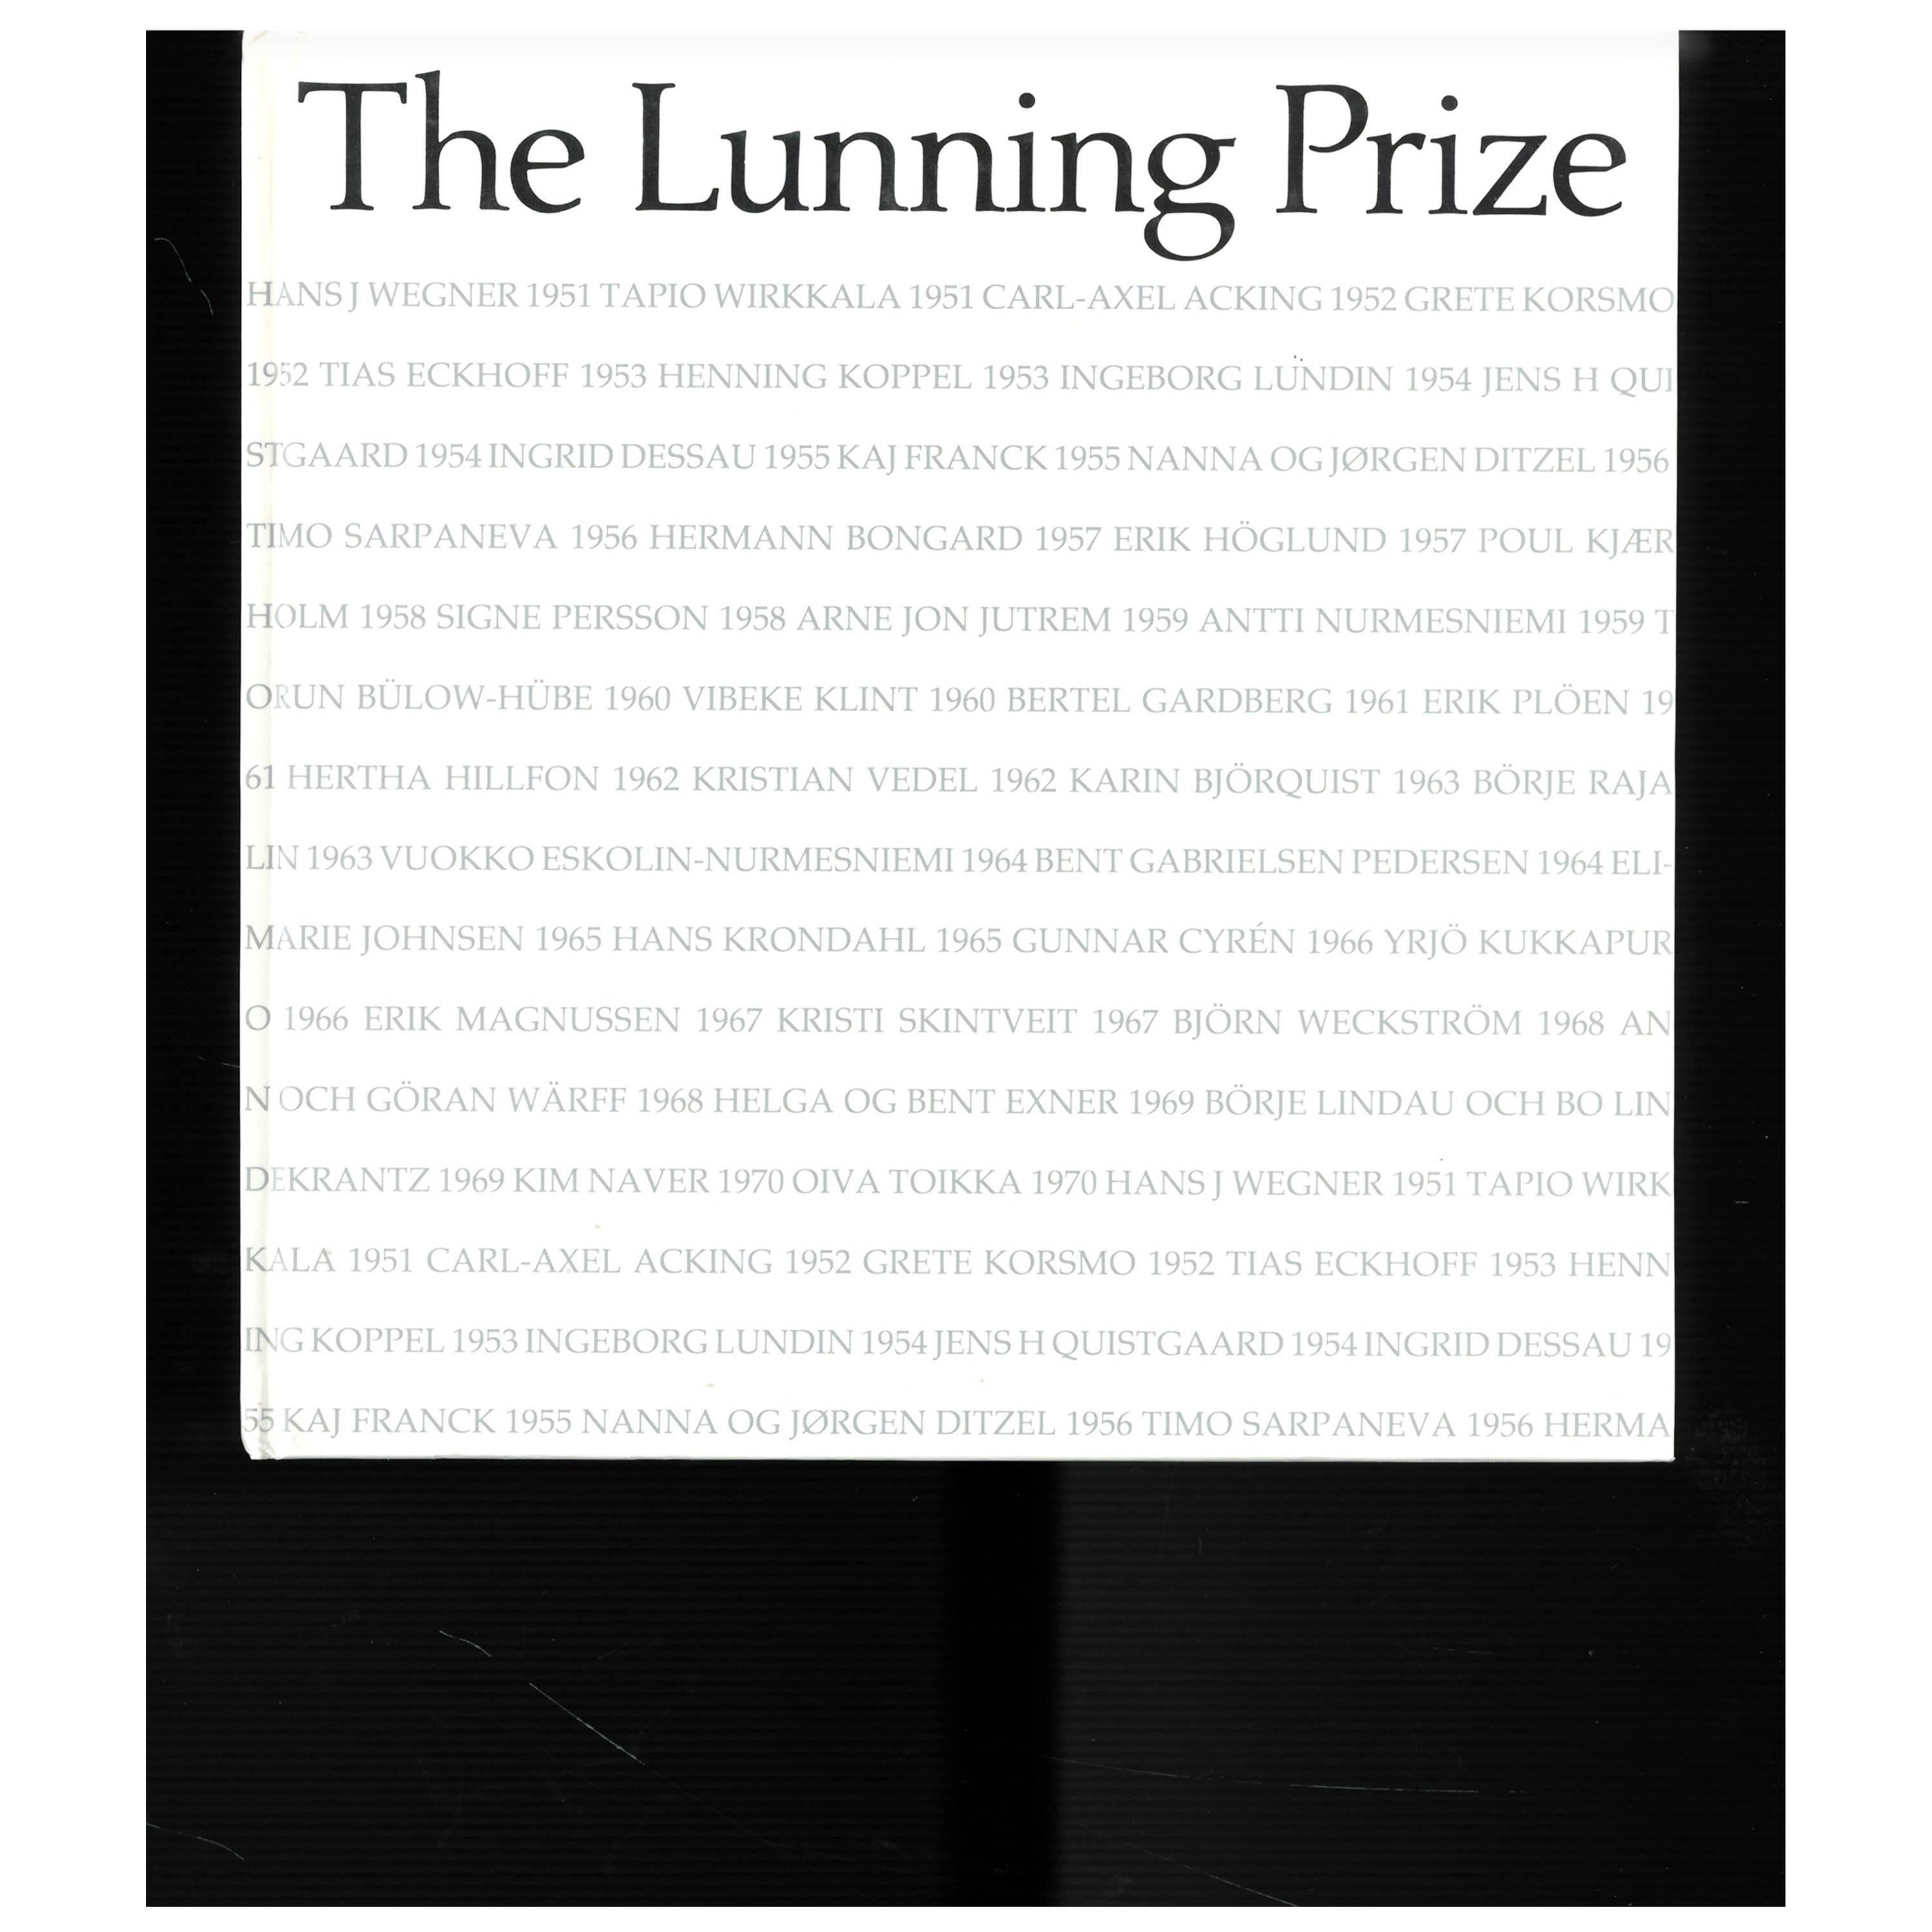 The Lunning Prize (Book)